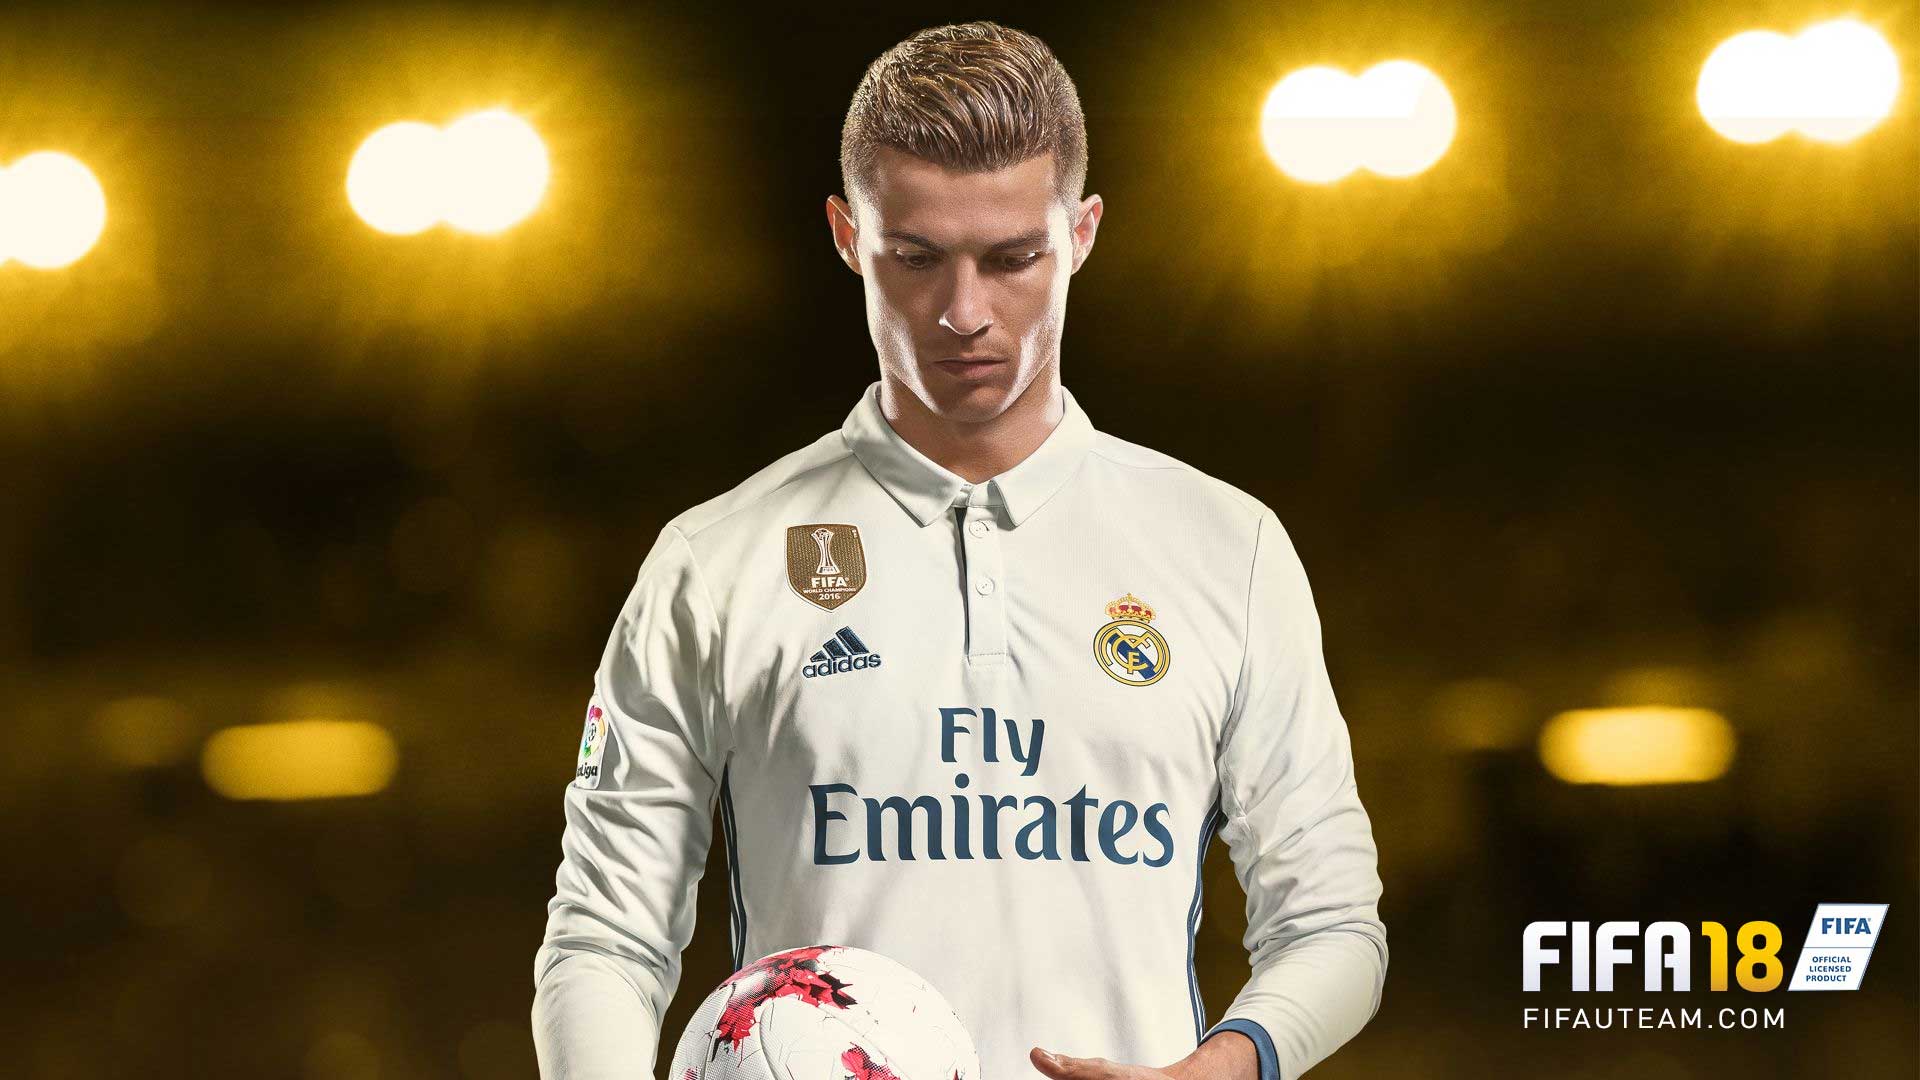 FIFA 18 Early Access and FIFA 18 Release Date